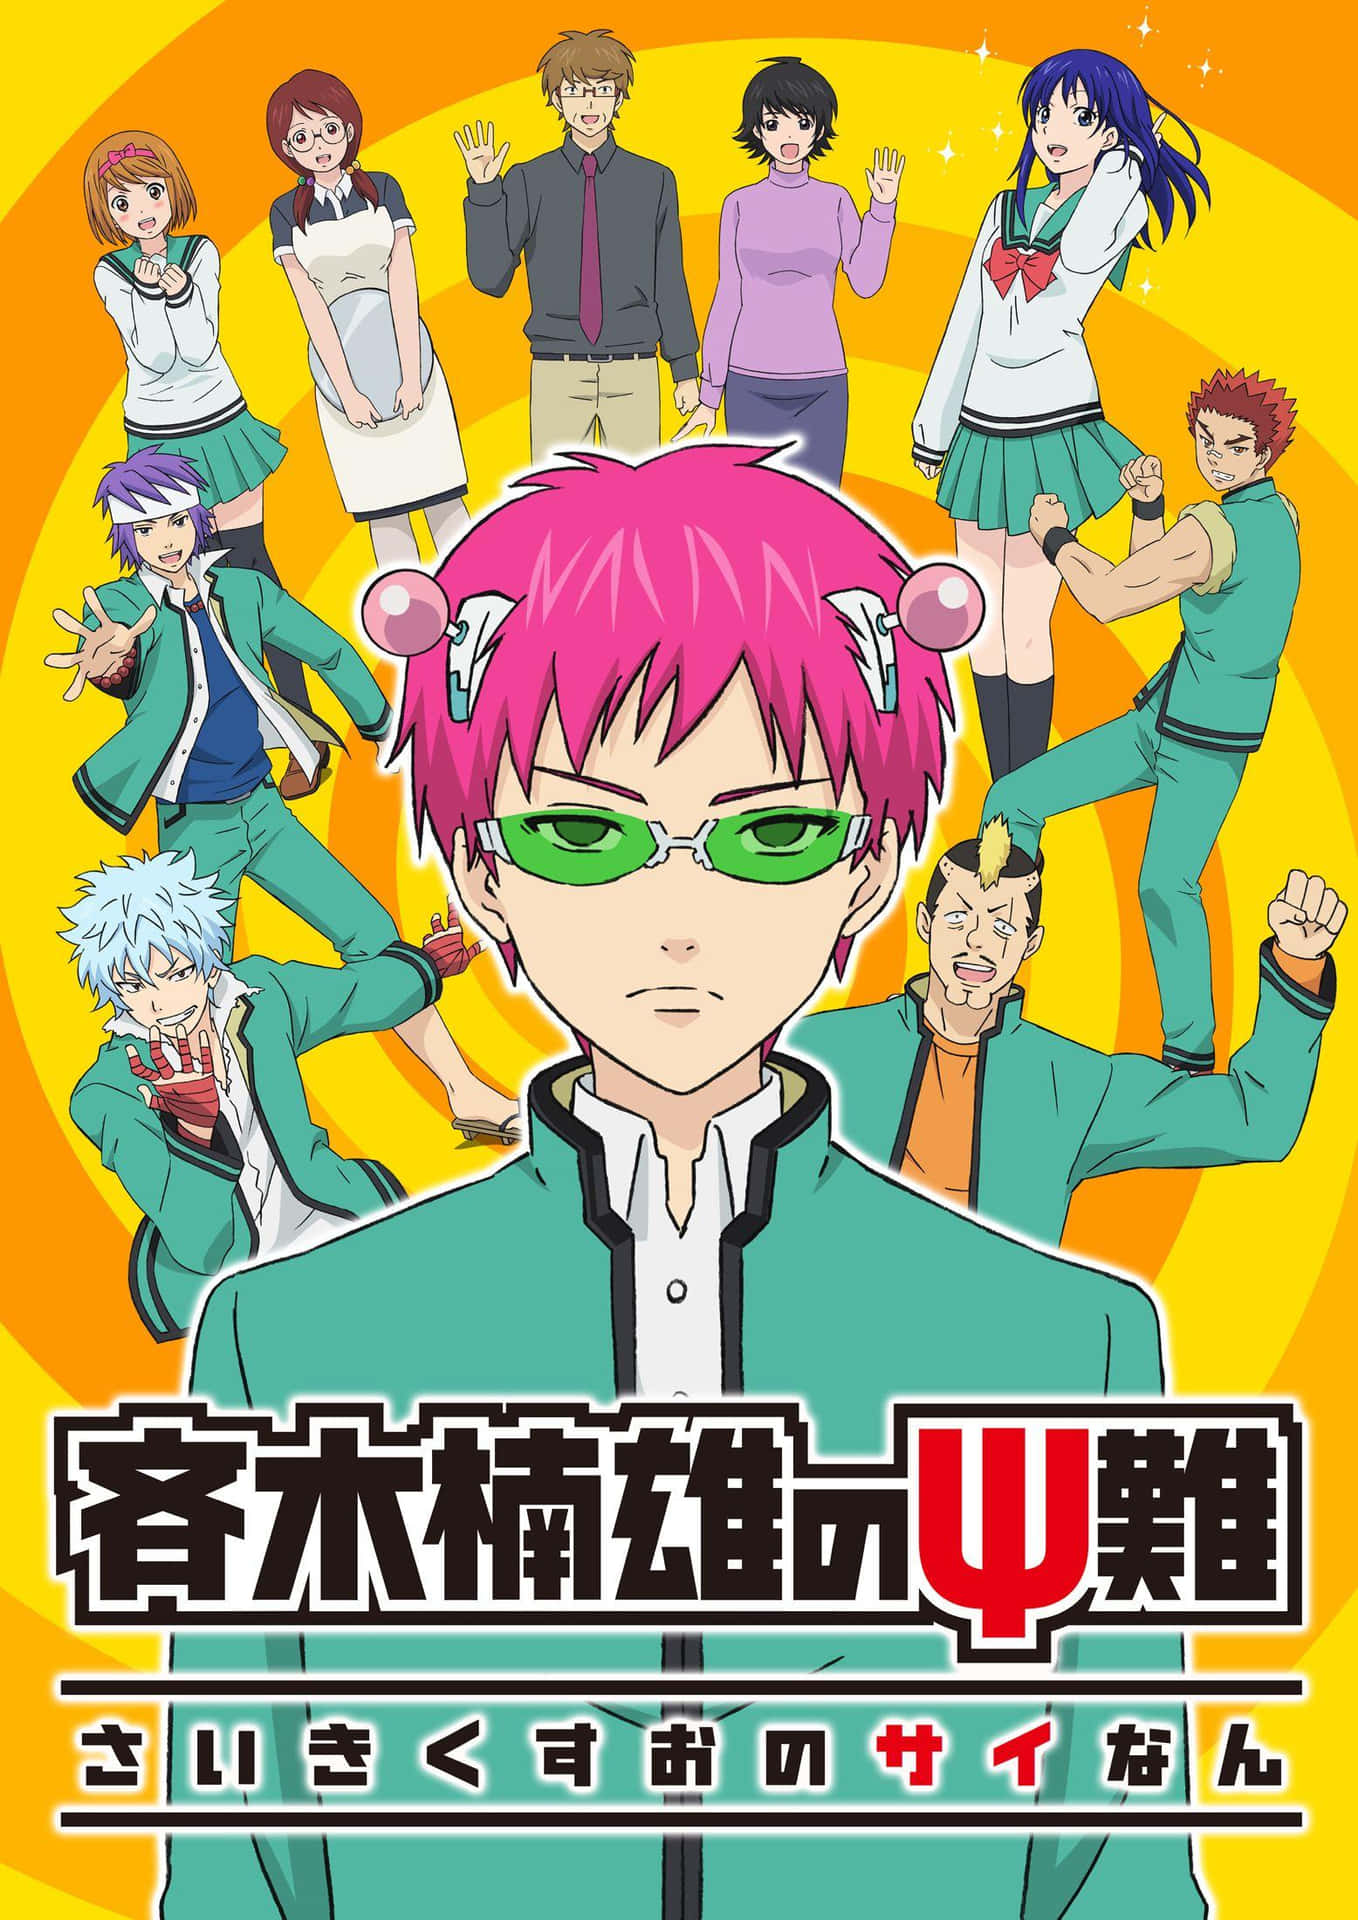 Saiki K. finds himself in a never-ending cycle of disasters. Wallpaper